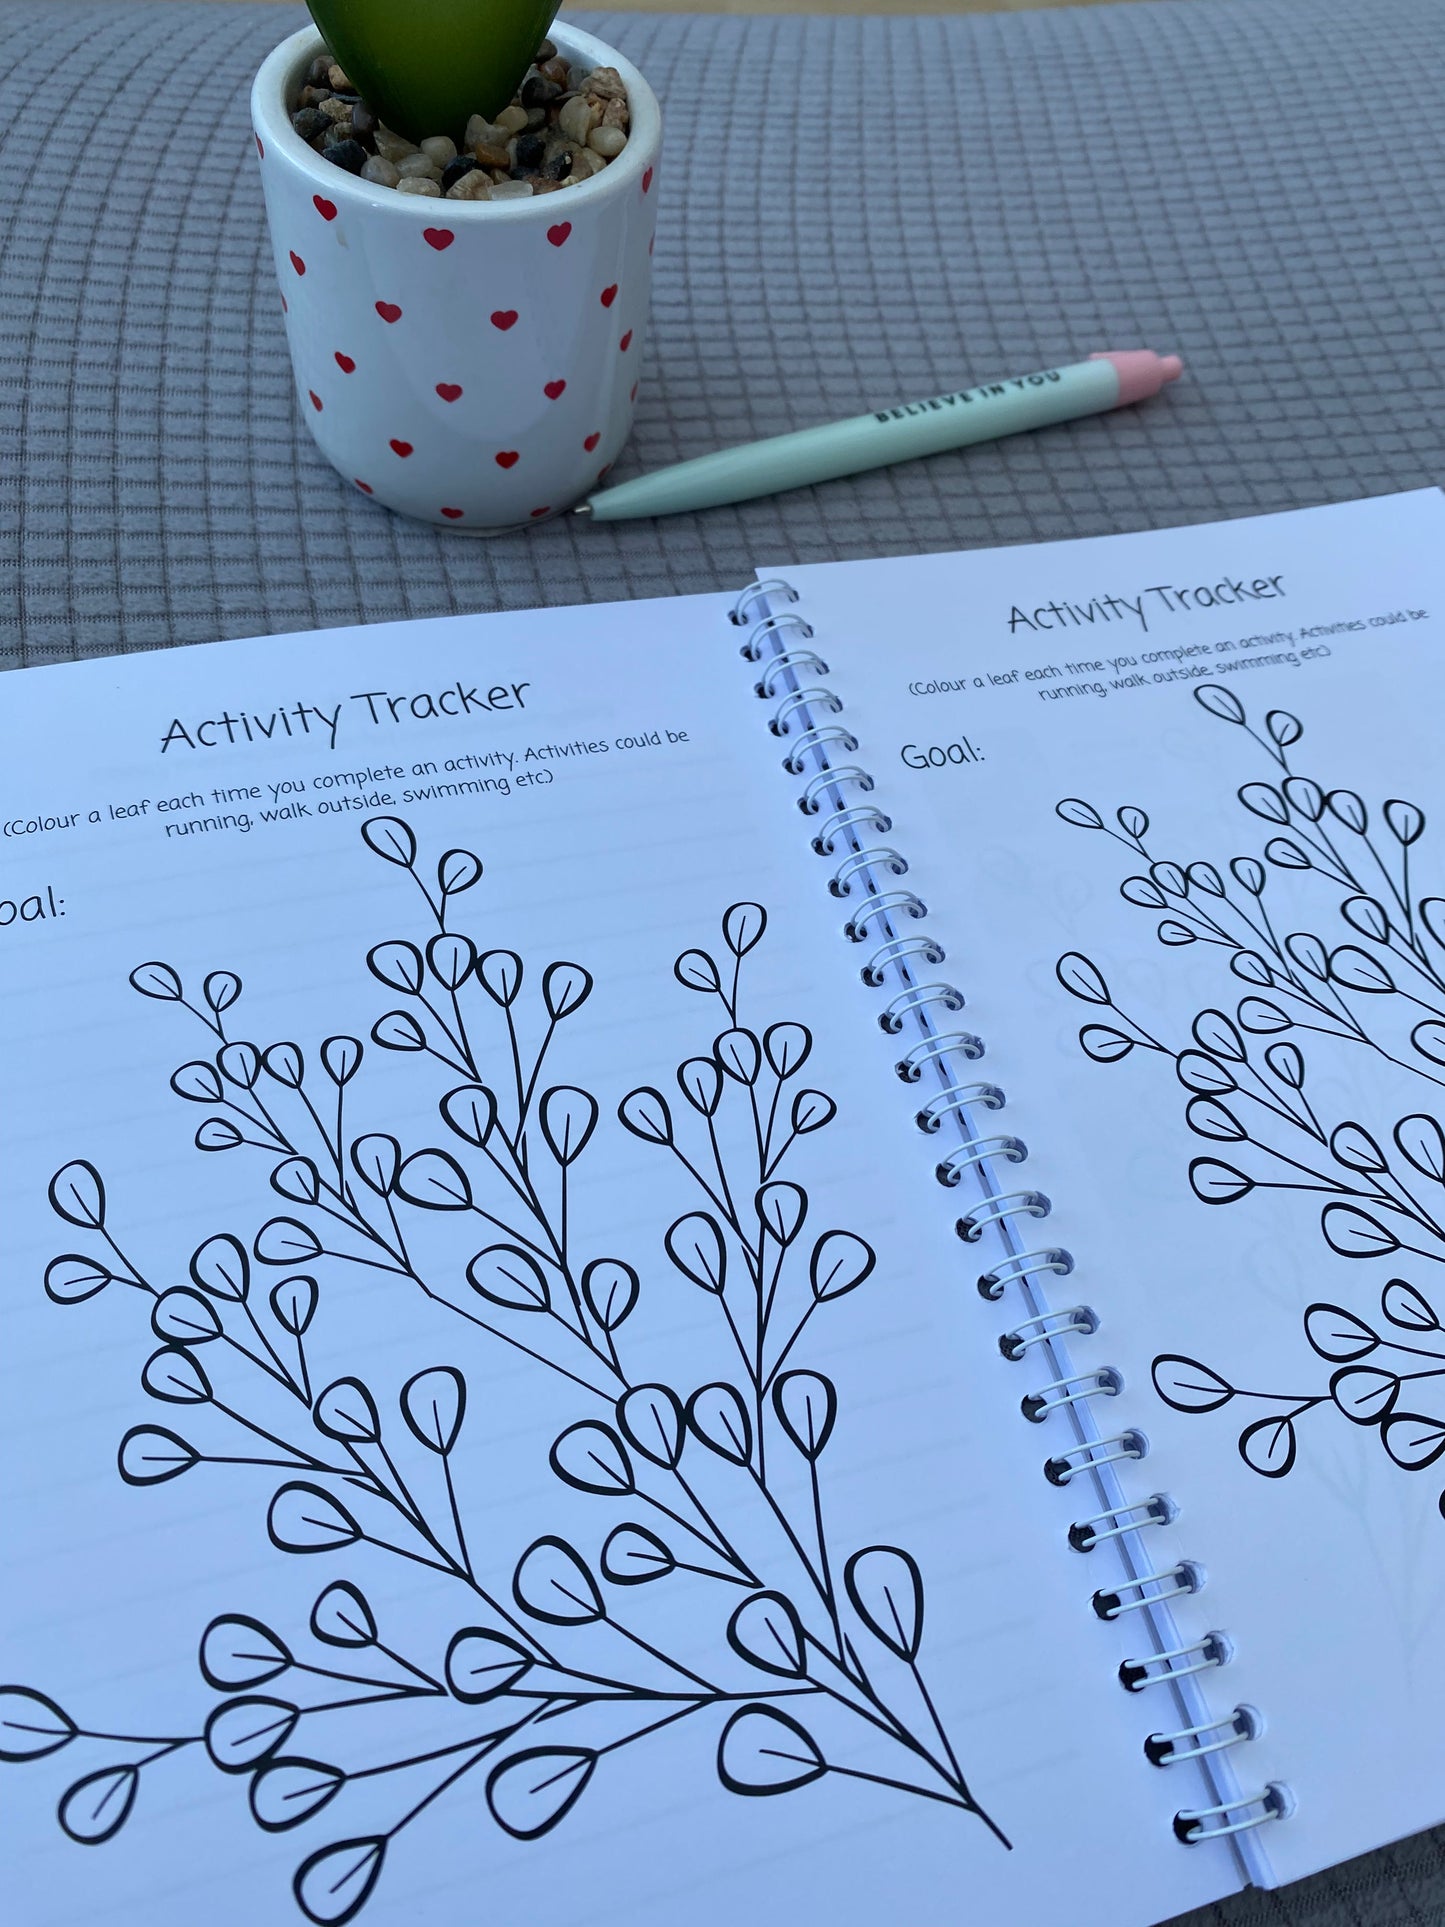 Cancer journal - You’re doing great, keep going, keep growing// A5, chemotherapy diary